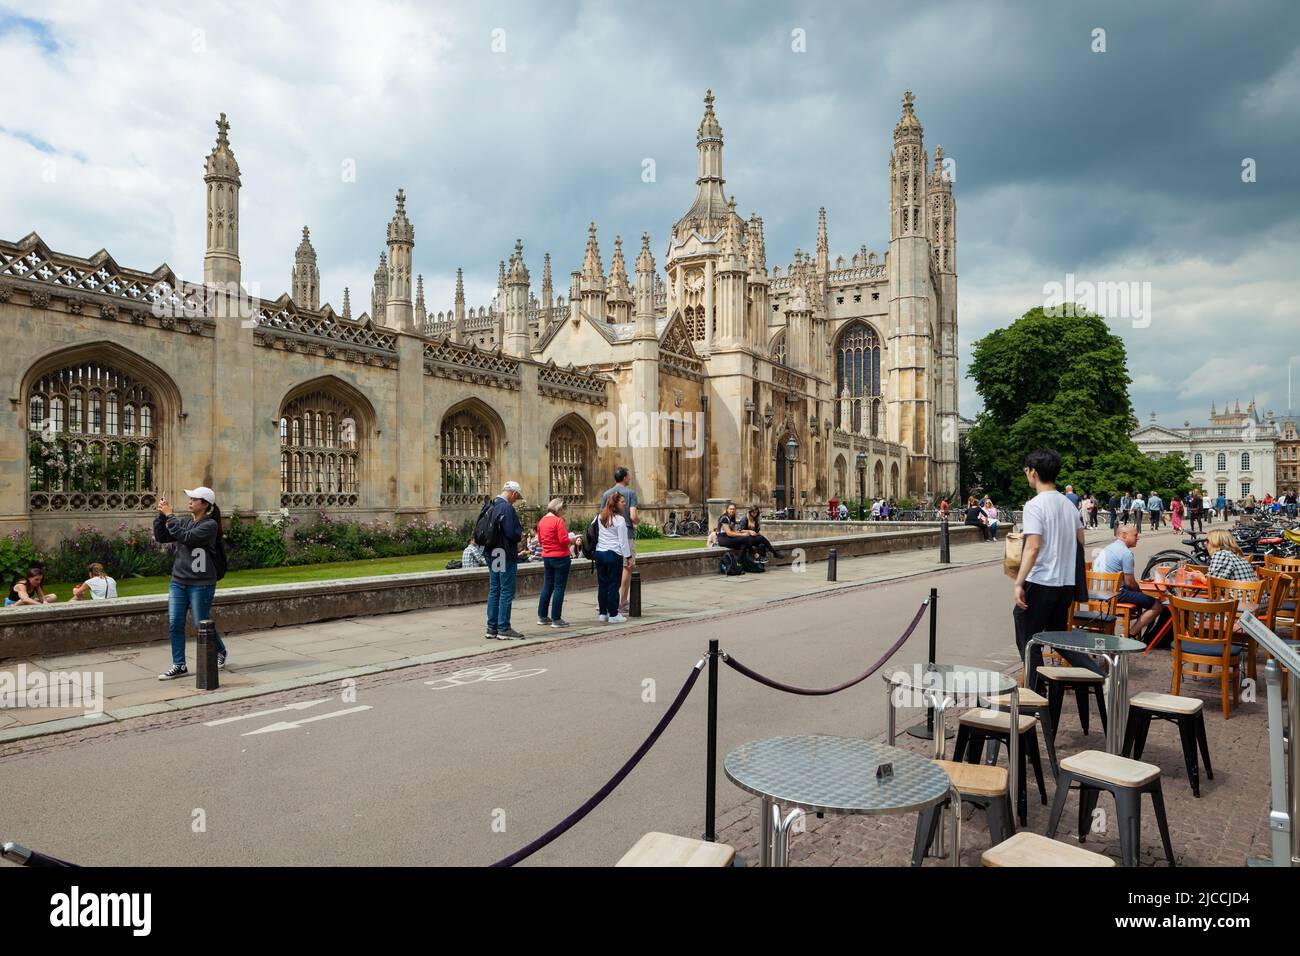 Stormy sky over King's College in Cambridge, England. Stock Photo